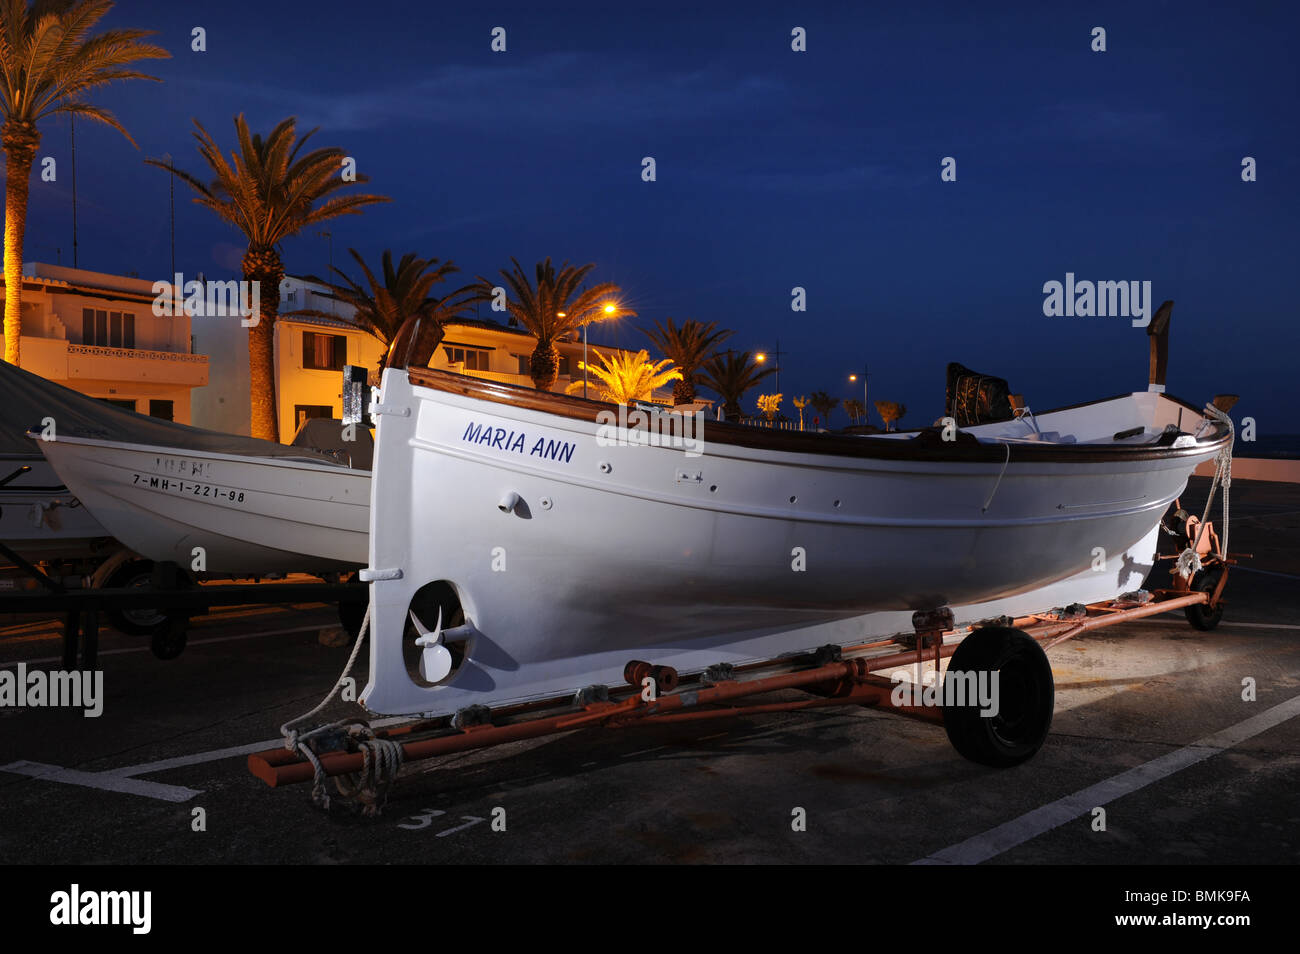 Small Spanish fishing boat, or Llaut, on trailer on the harbourside, S'Algar, Menorca, Spain, photographed at night Stock Photo